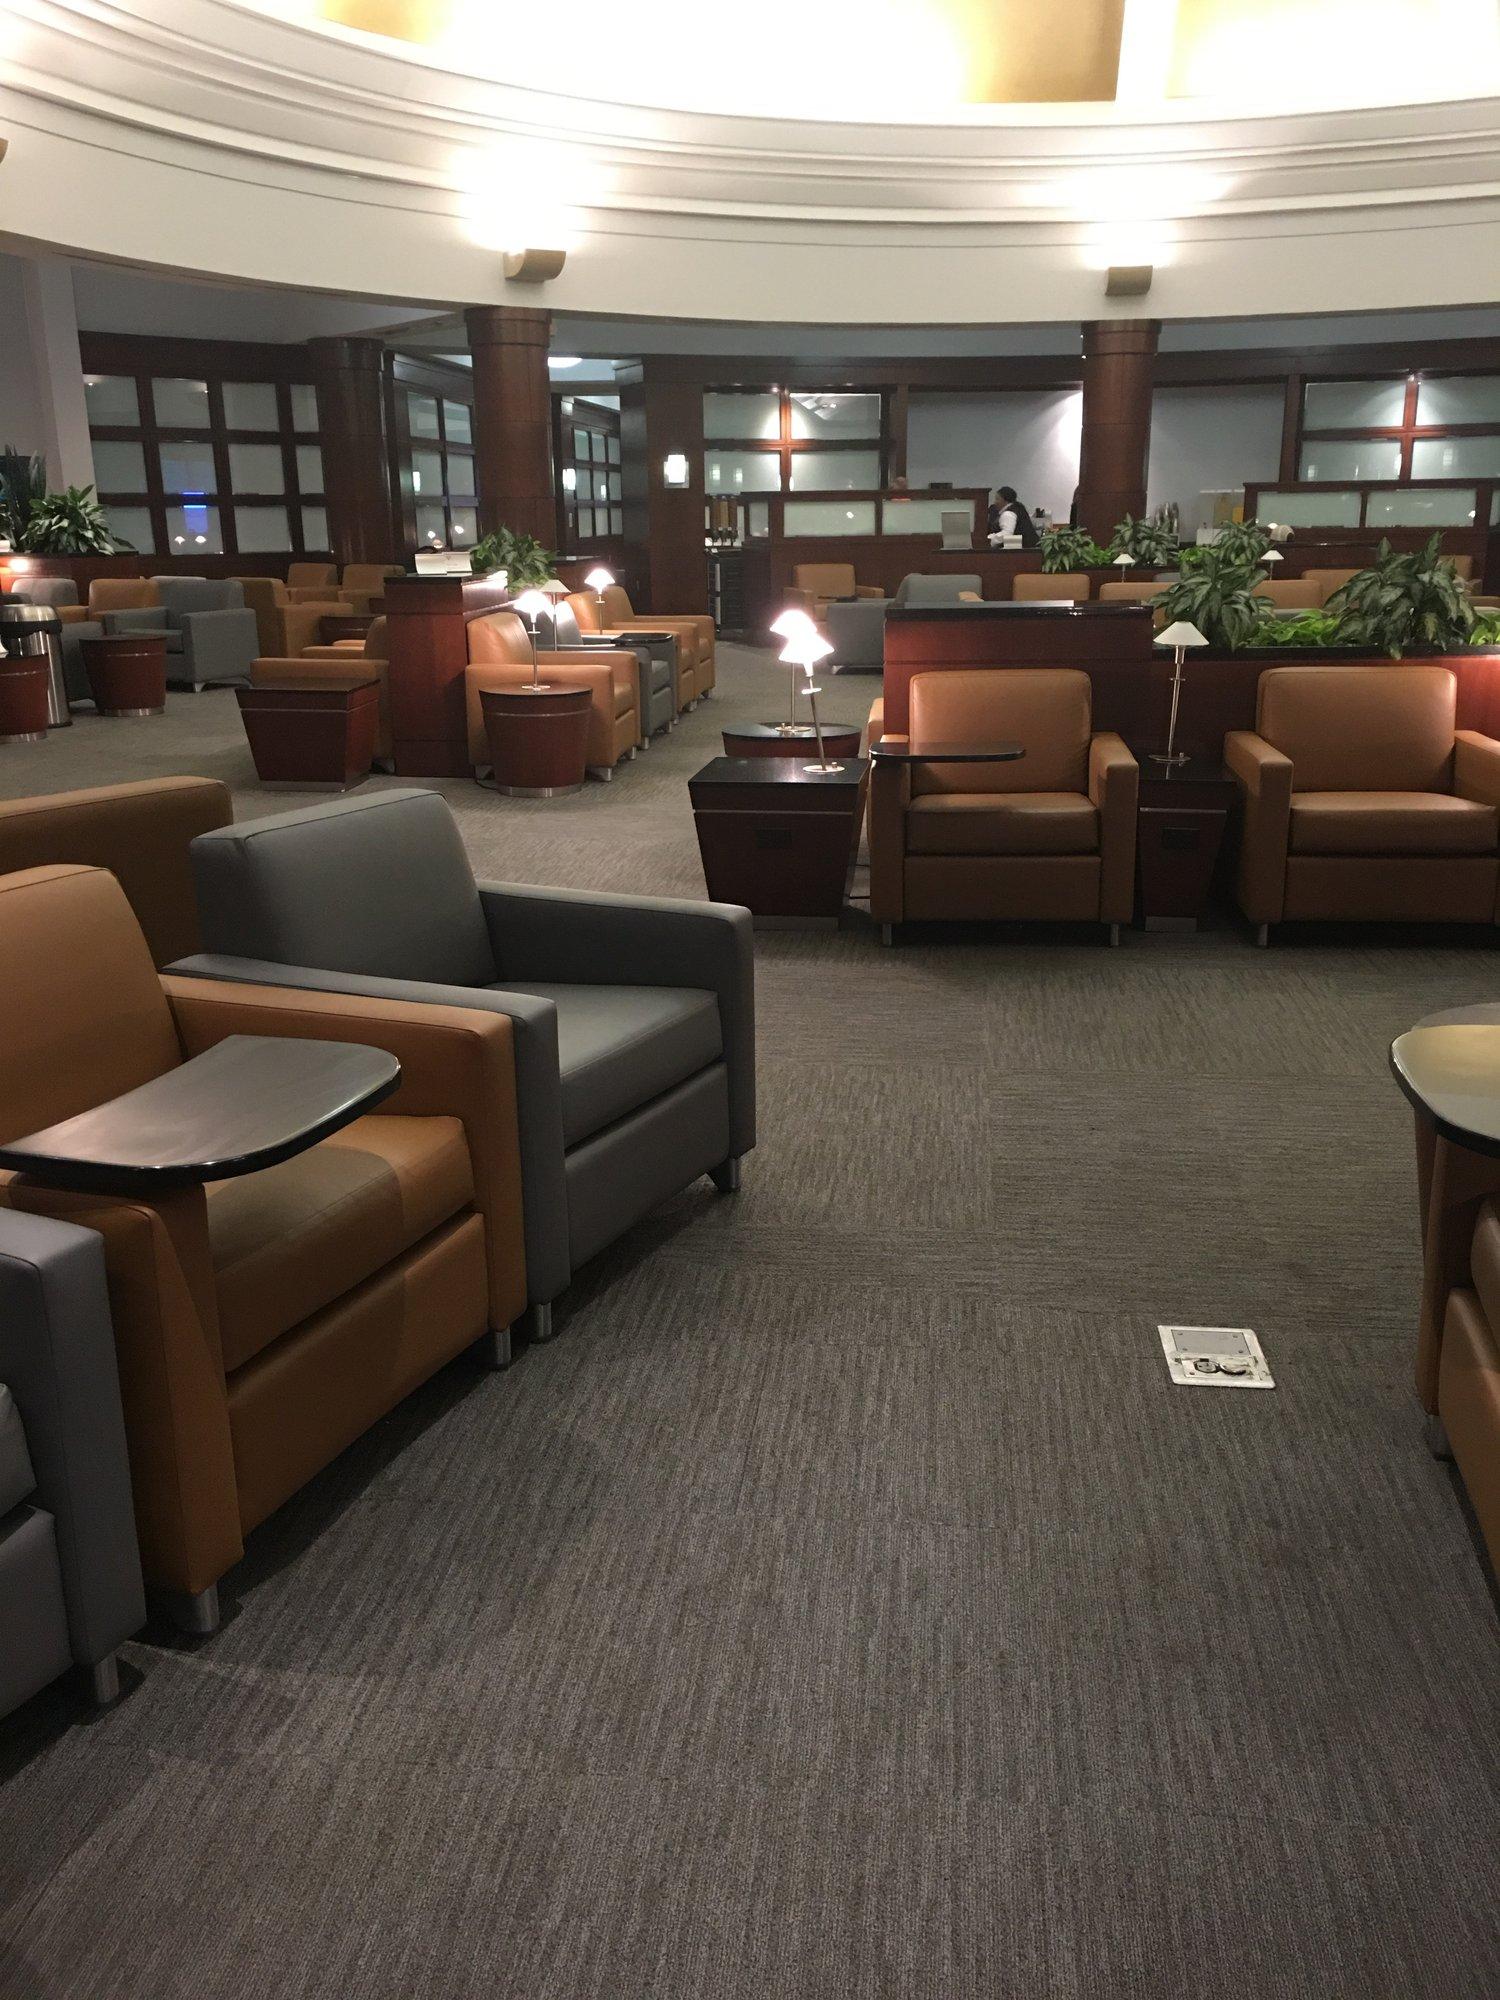 American Airlines Admirals Club image 37 of 37